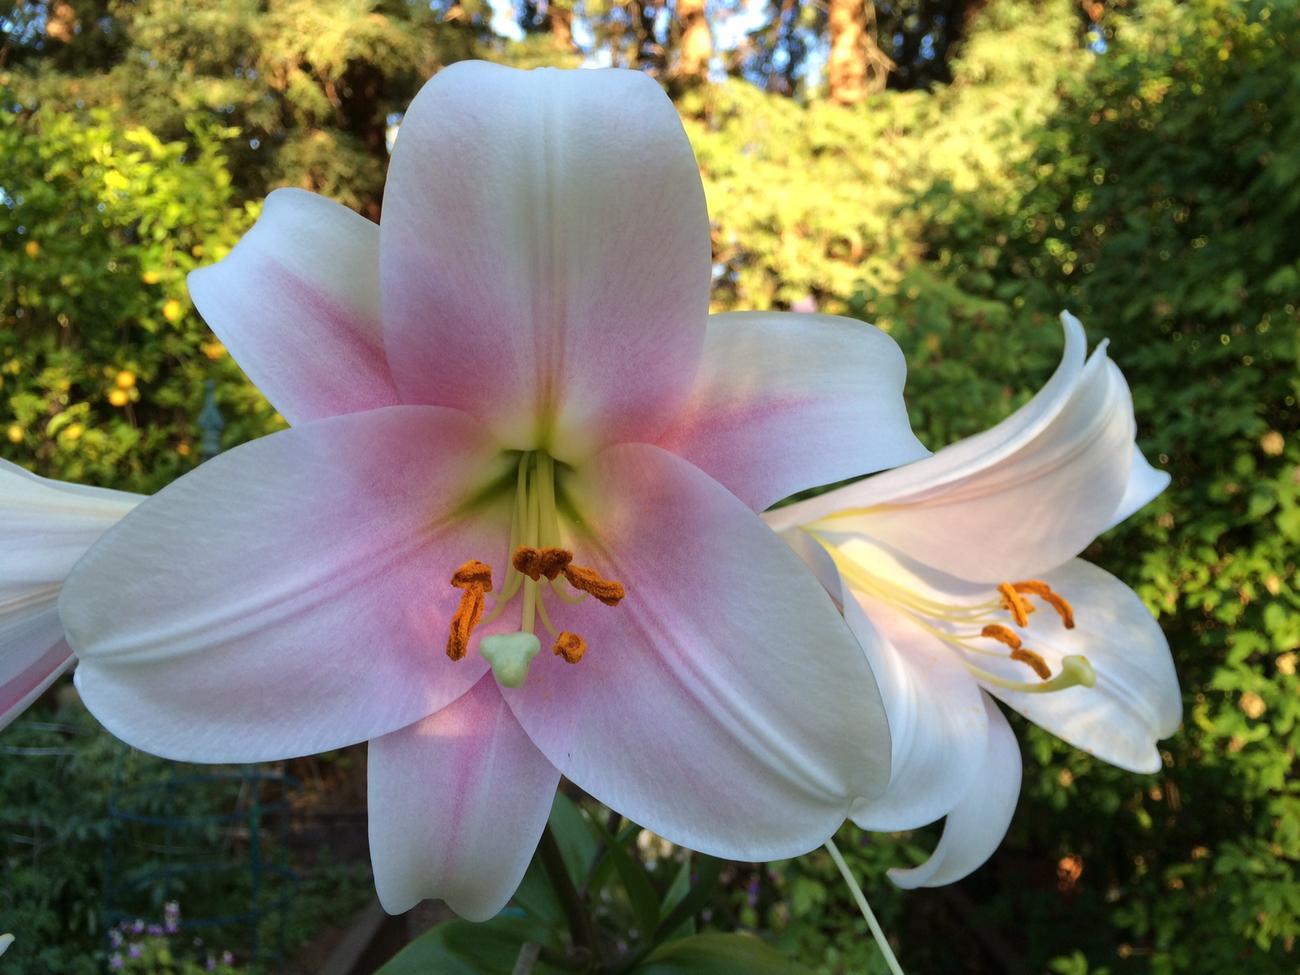 Oriental lilies: Summer’s most stylish blooms?